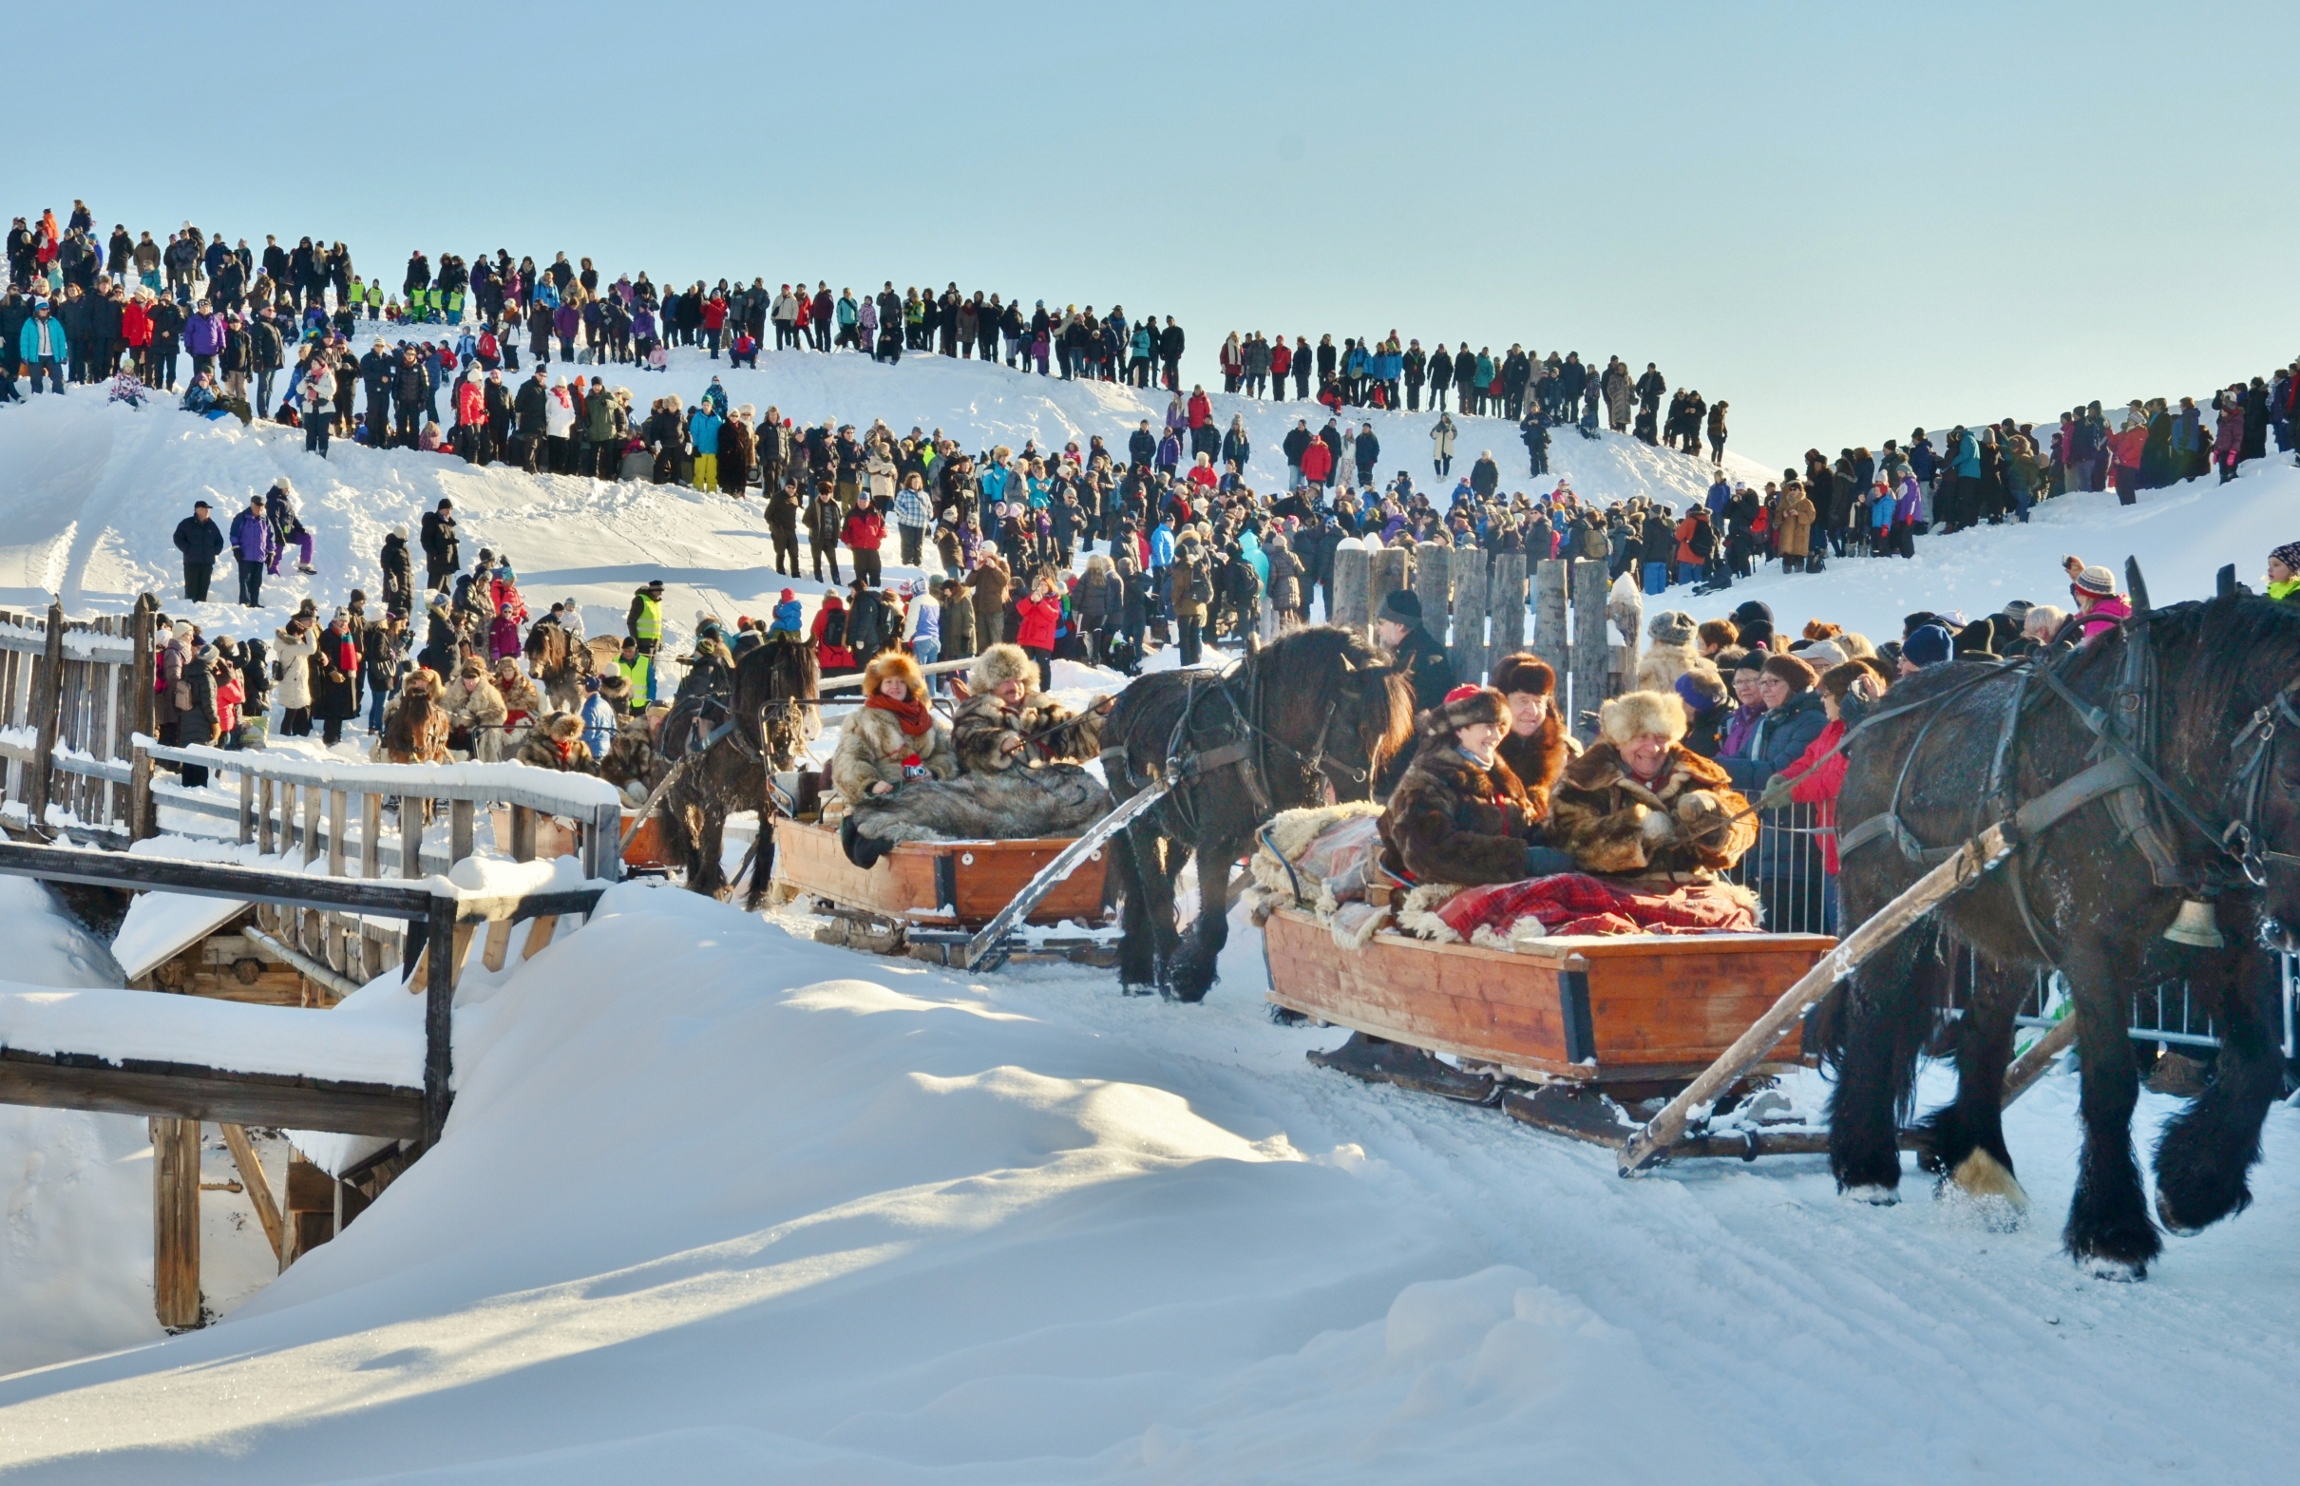 Røros winter market-party-shopping-must see